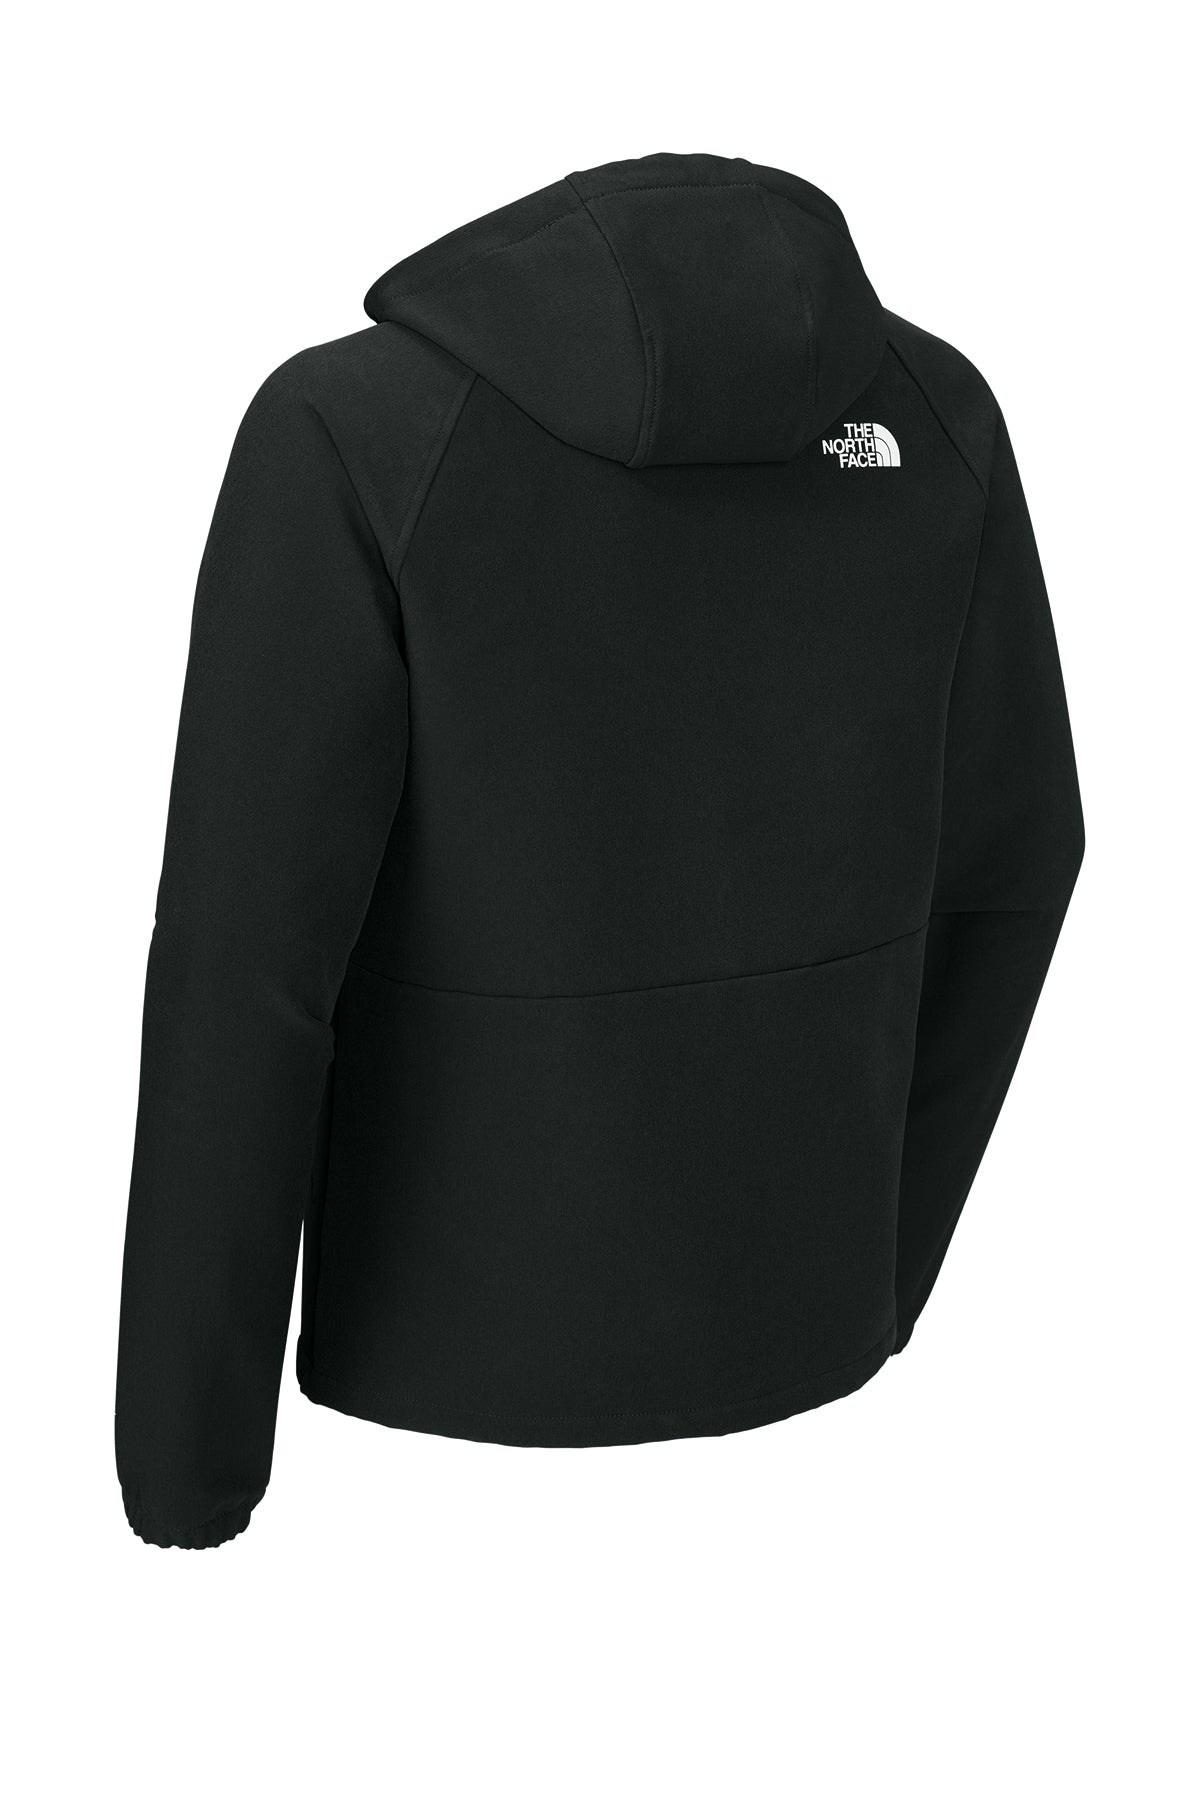 North Face Barr Lake Hooded Soft Shell Jackets, Black Heather